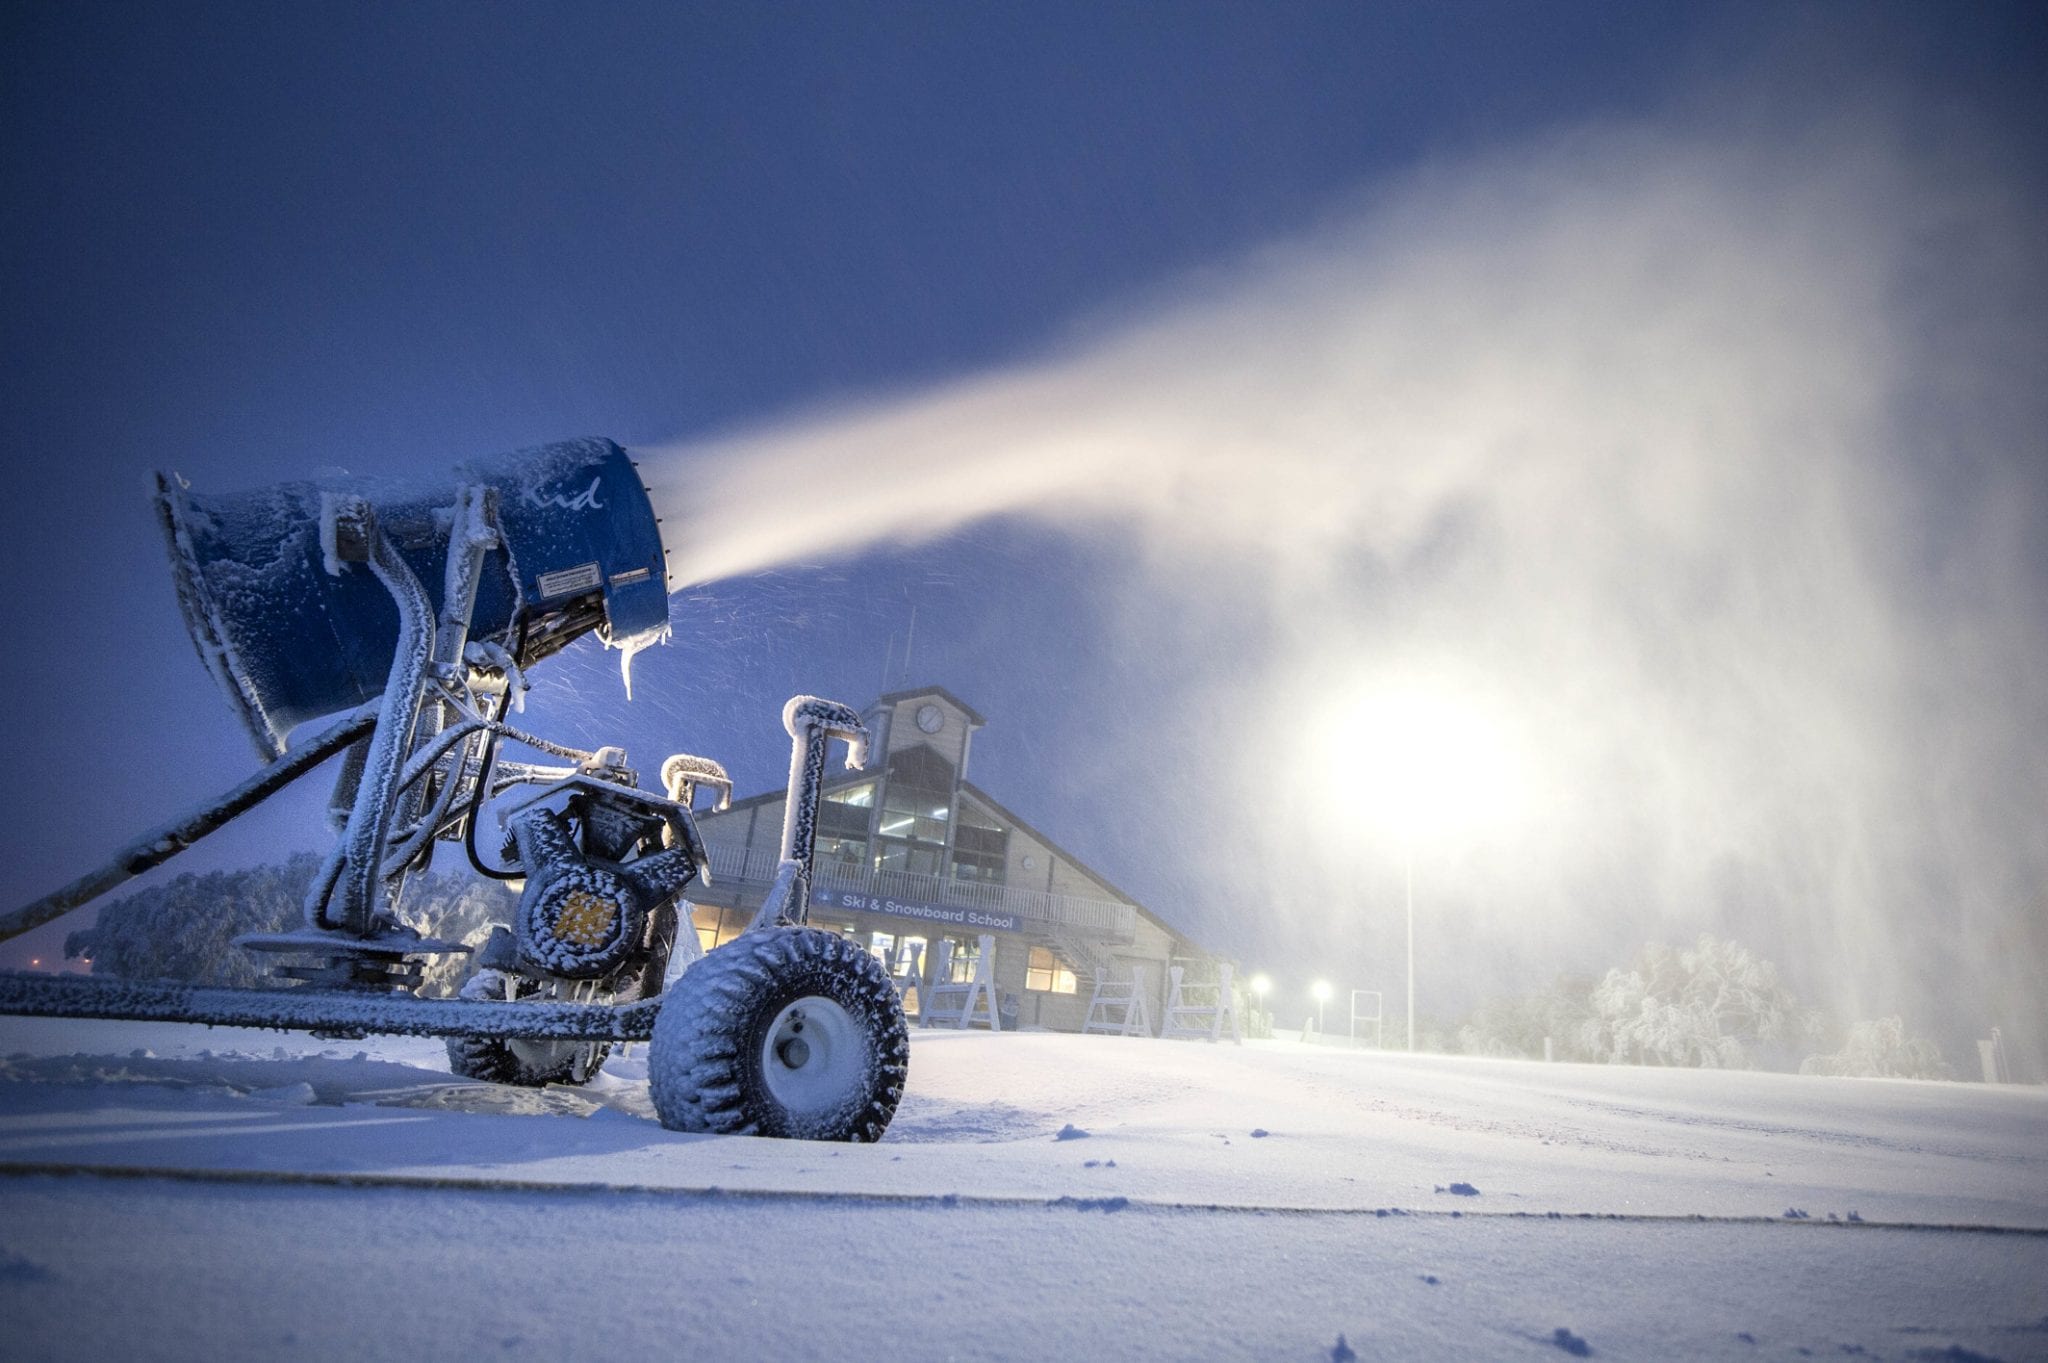 mbar snowmaking early morning